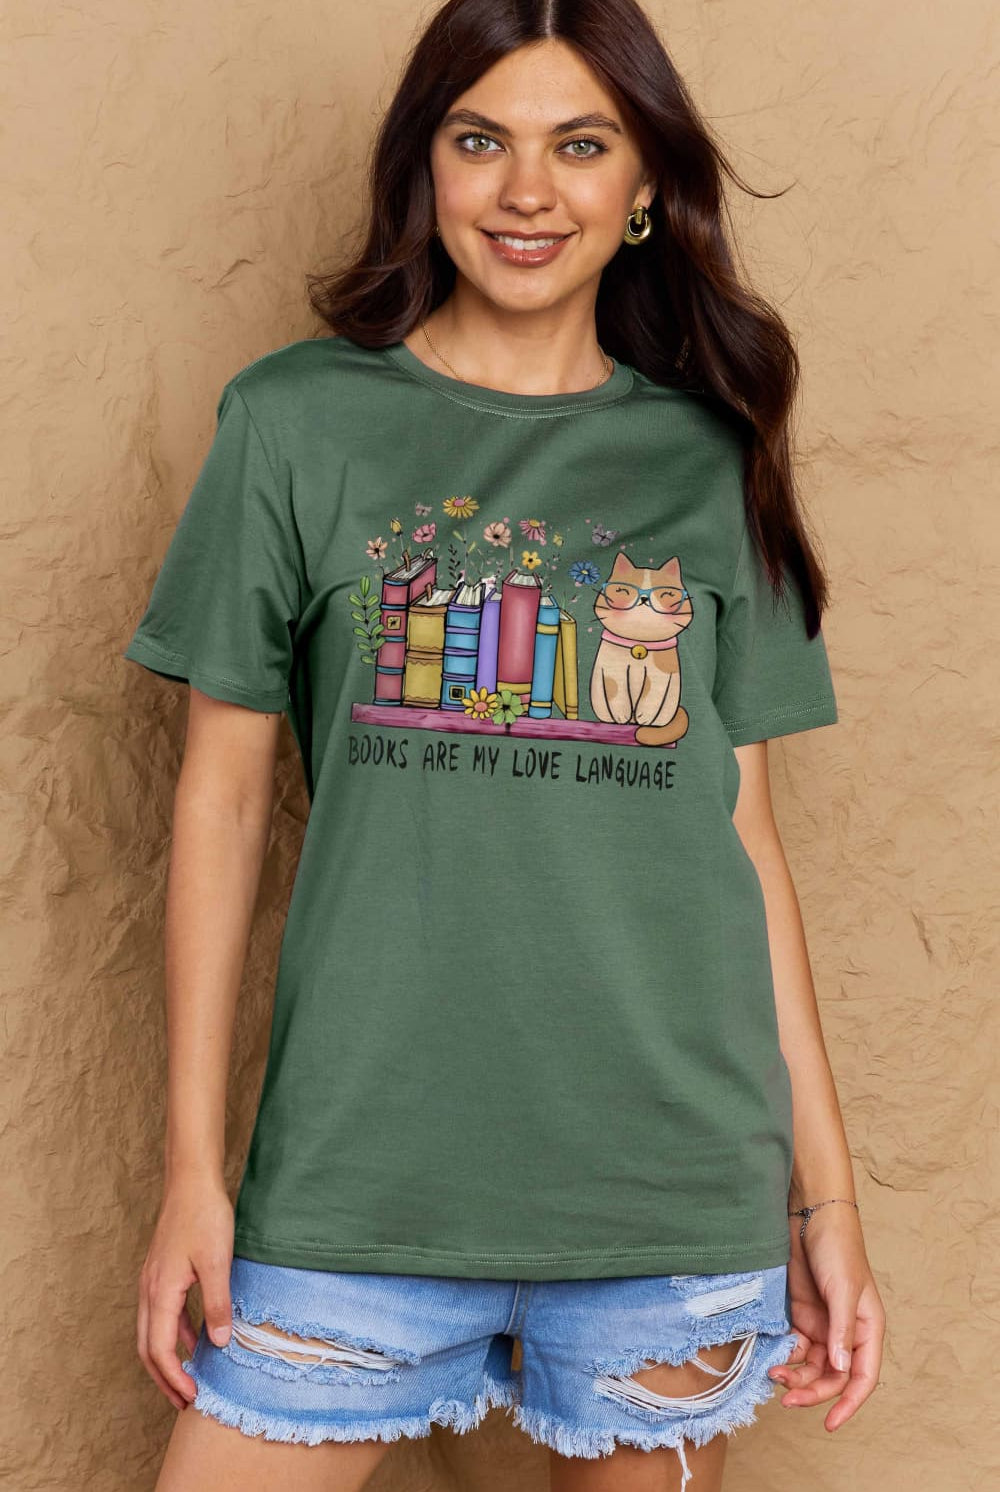 Rosy Brown BOOKS ARE MY LOVE LANGUAGE Graphic Cotton Tee Graphic Tees